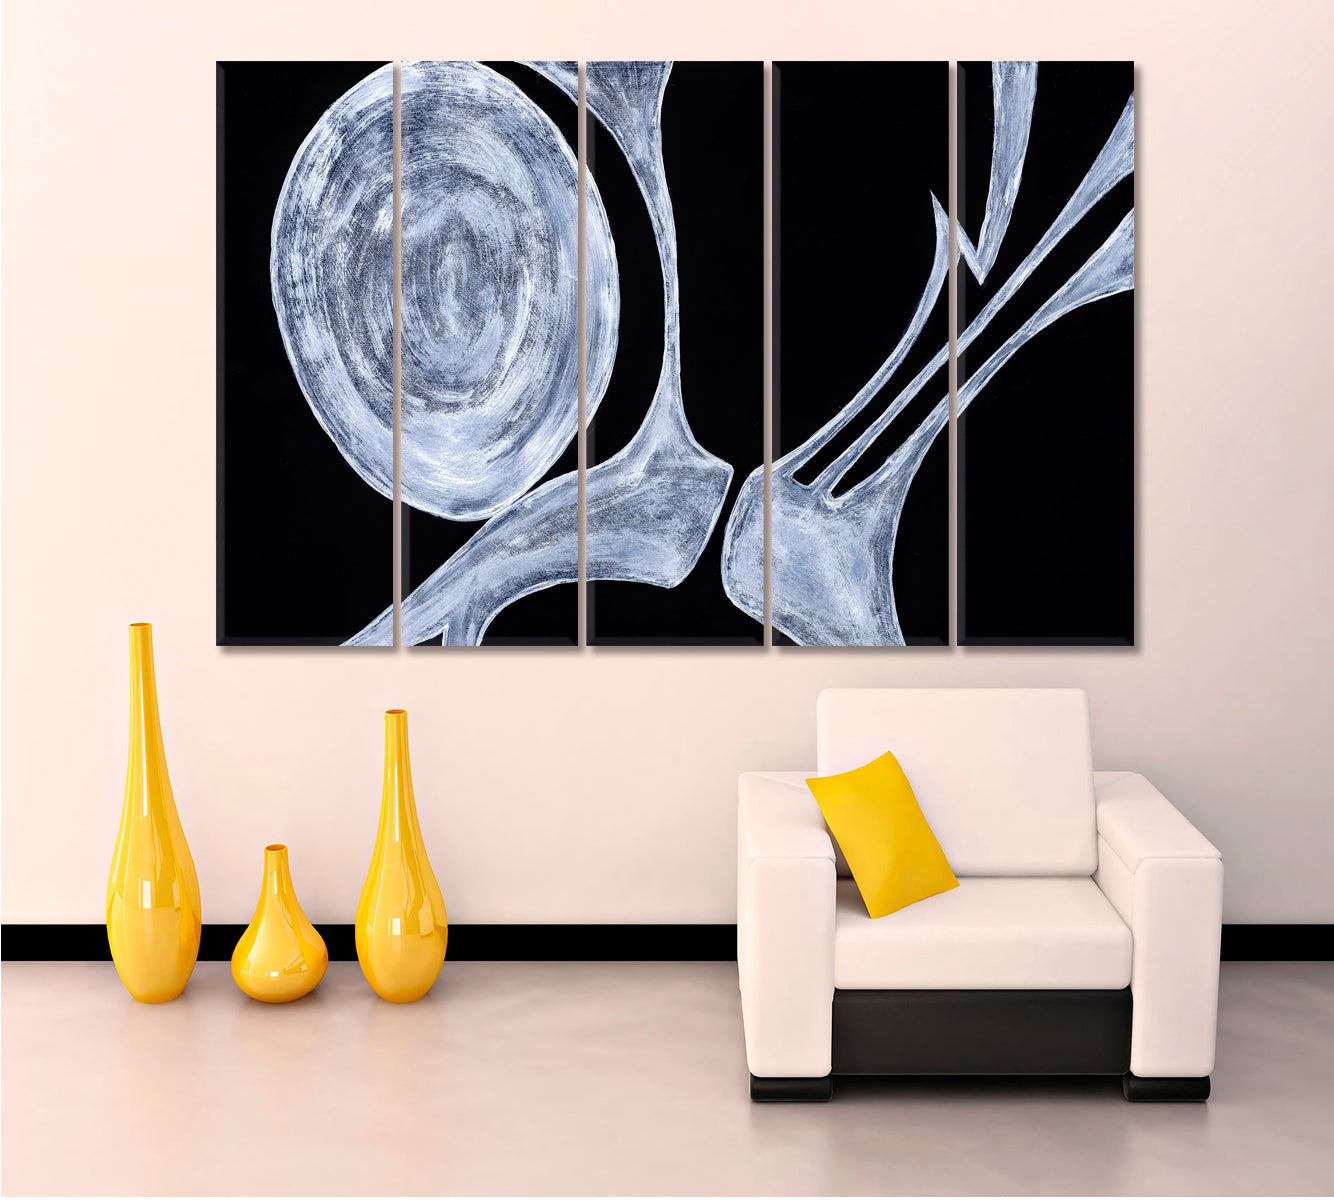 BONY OBJECTS Simple Curved Geometric Shapes Lines Black White Art Contemporary Art Artesty 5 panels 36" x 24" 